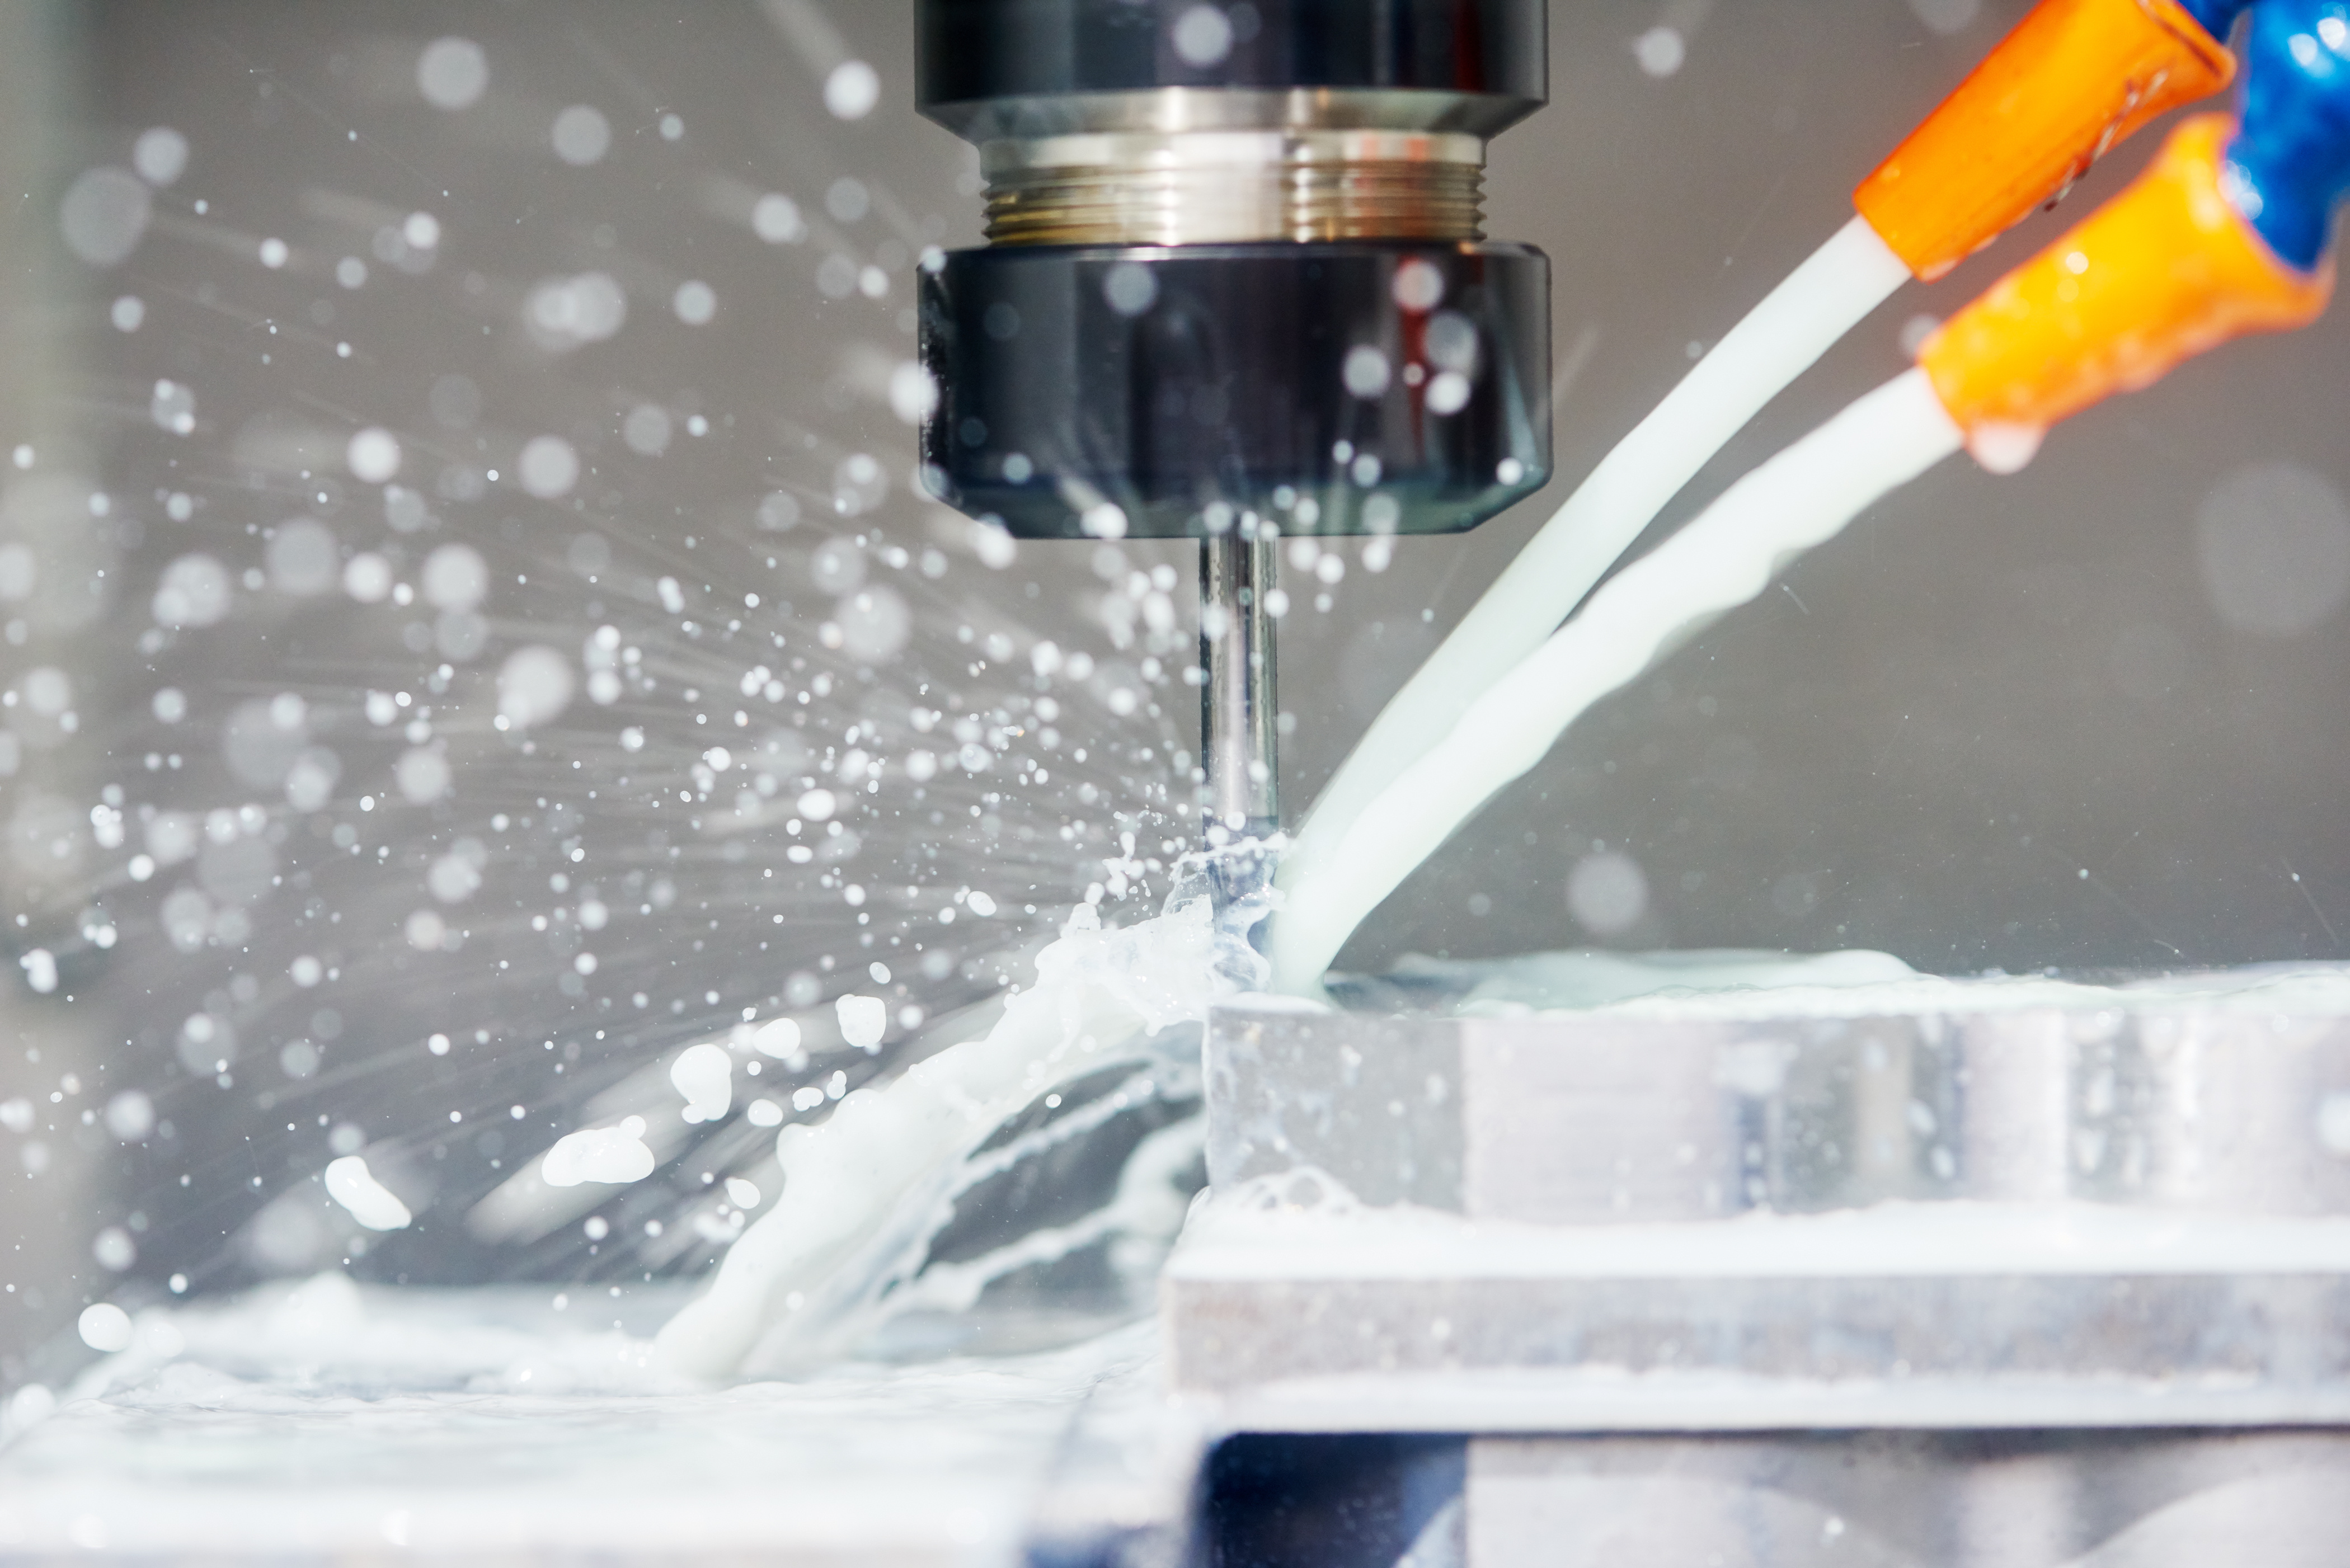 Are you working safely with metalworking fluids?